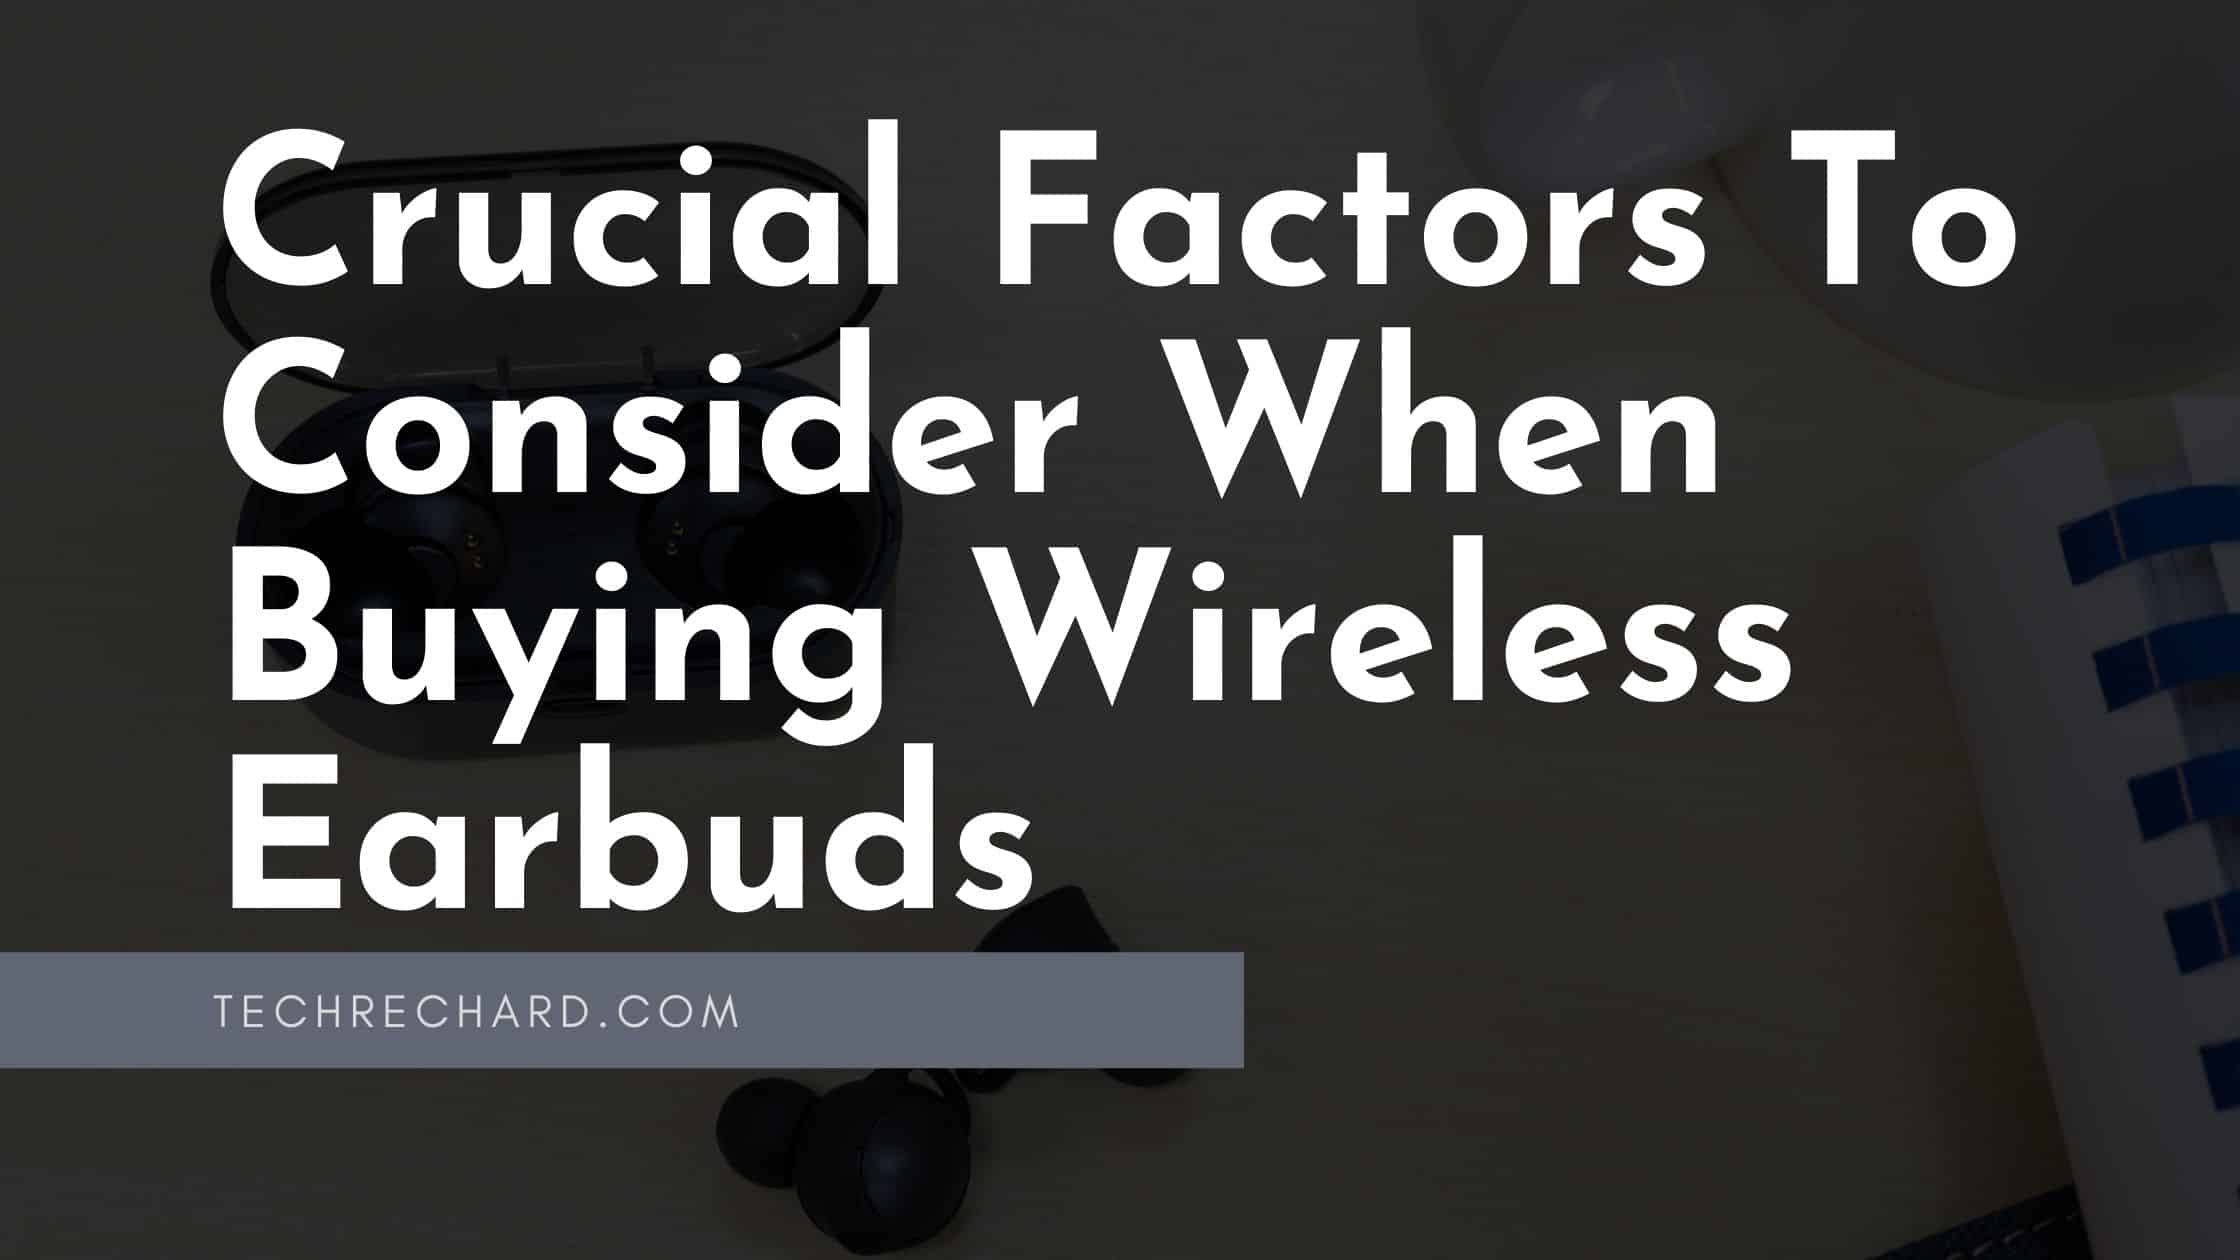 Crucial Factors To Consider When Buying Wireless Earbuds